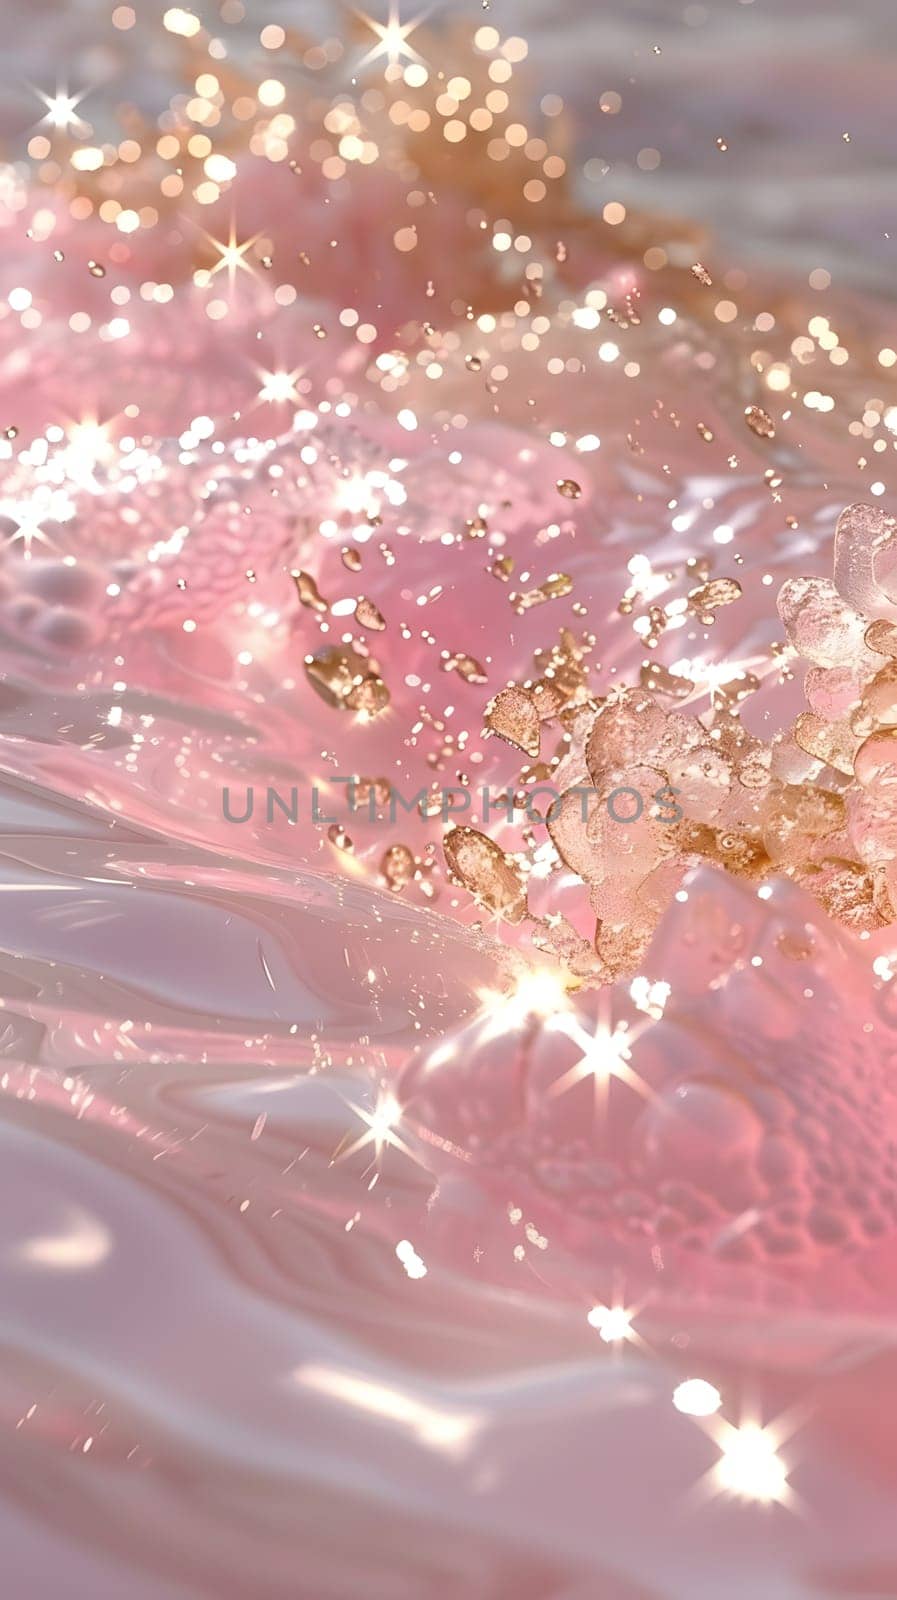 A close up of a magenta and gold patterned background with sparkles by Nadtochiy